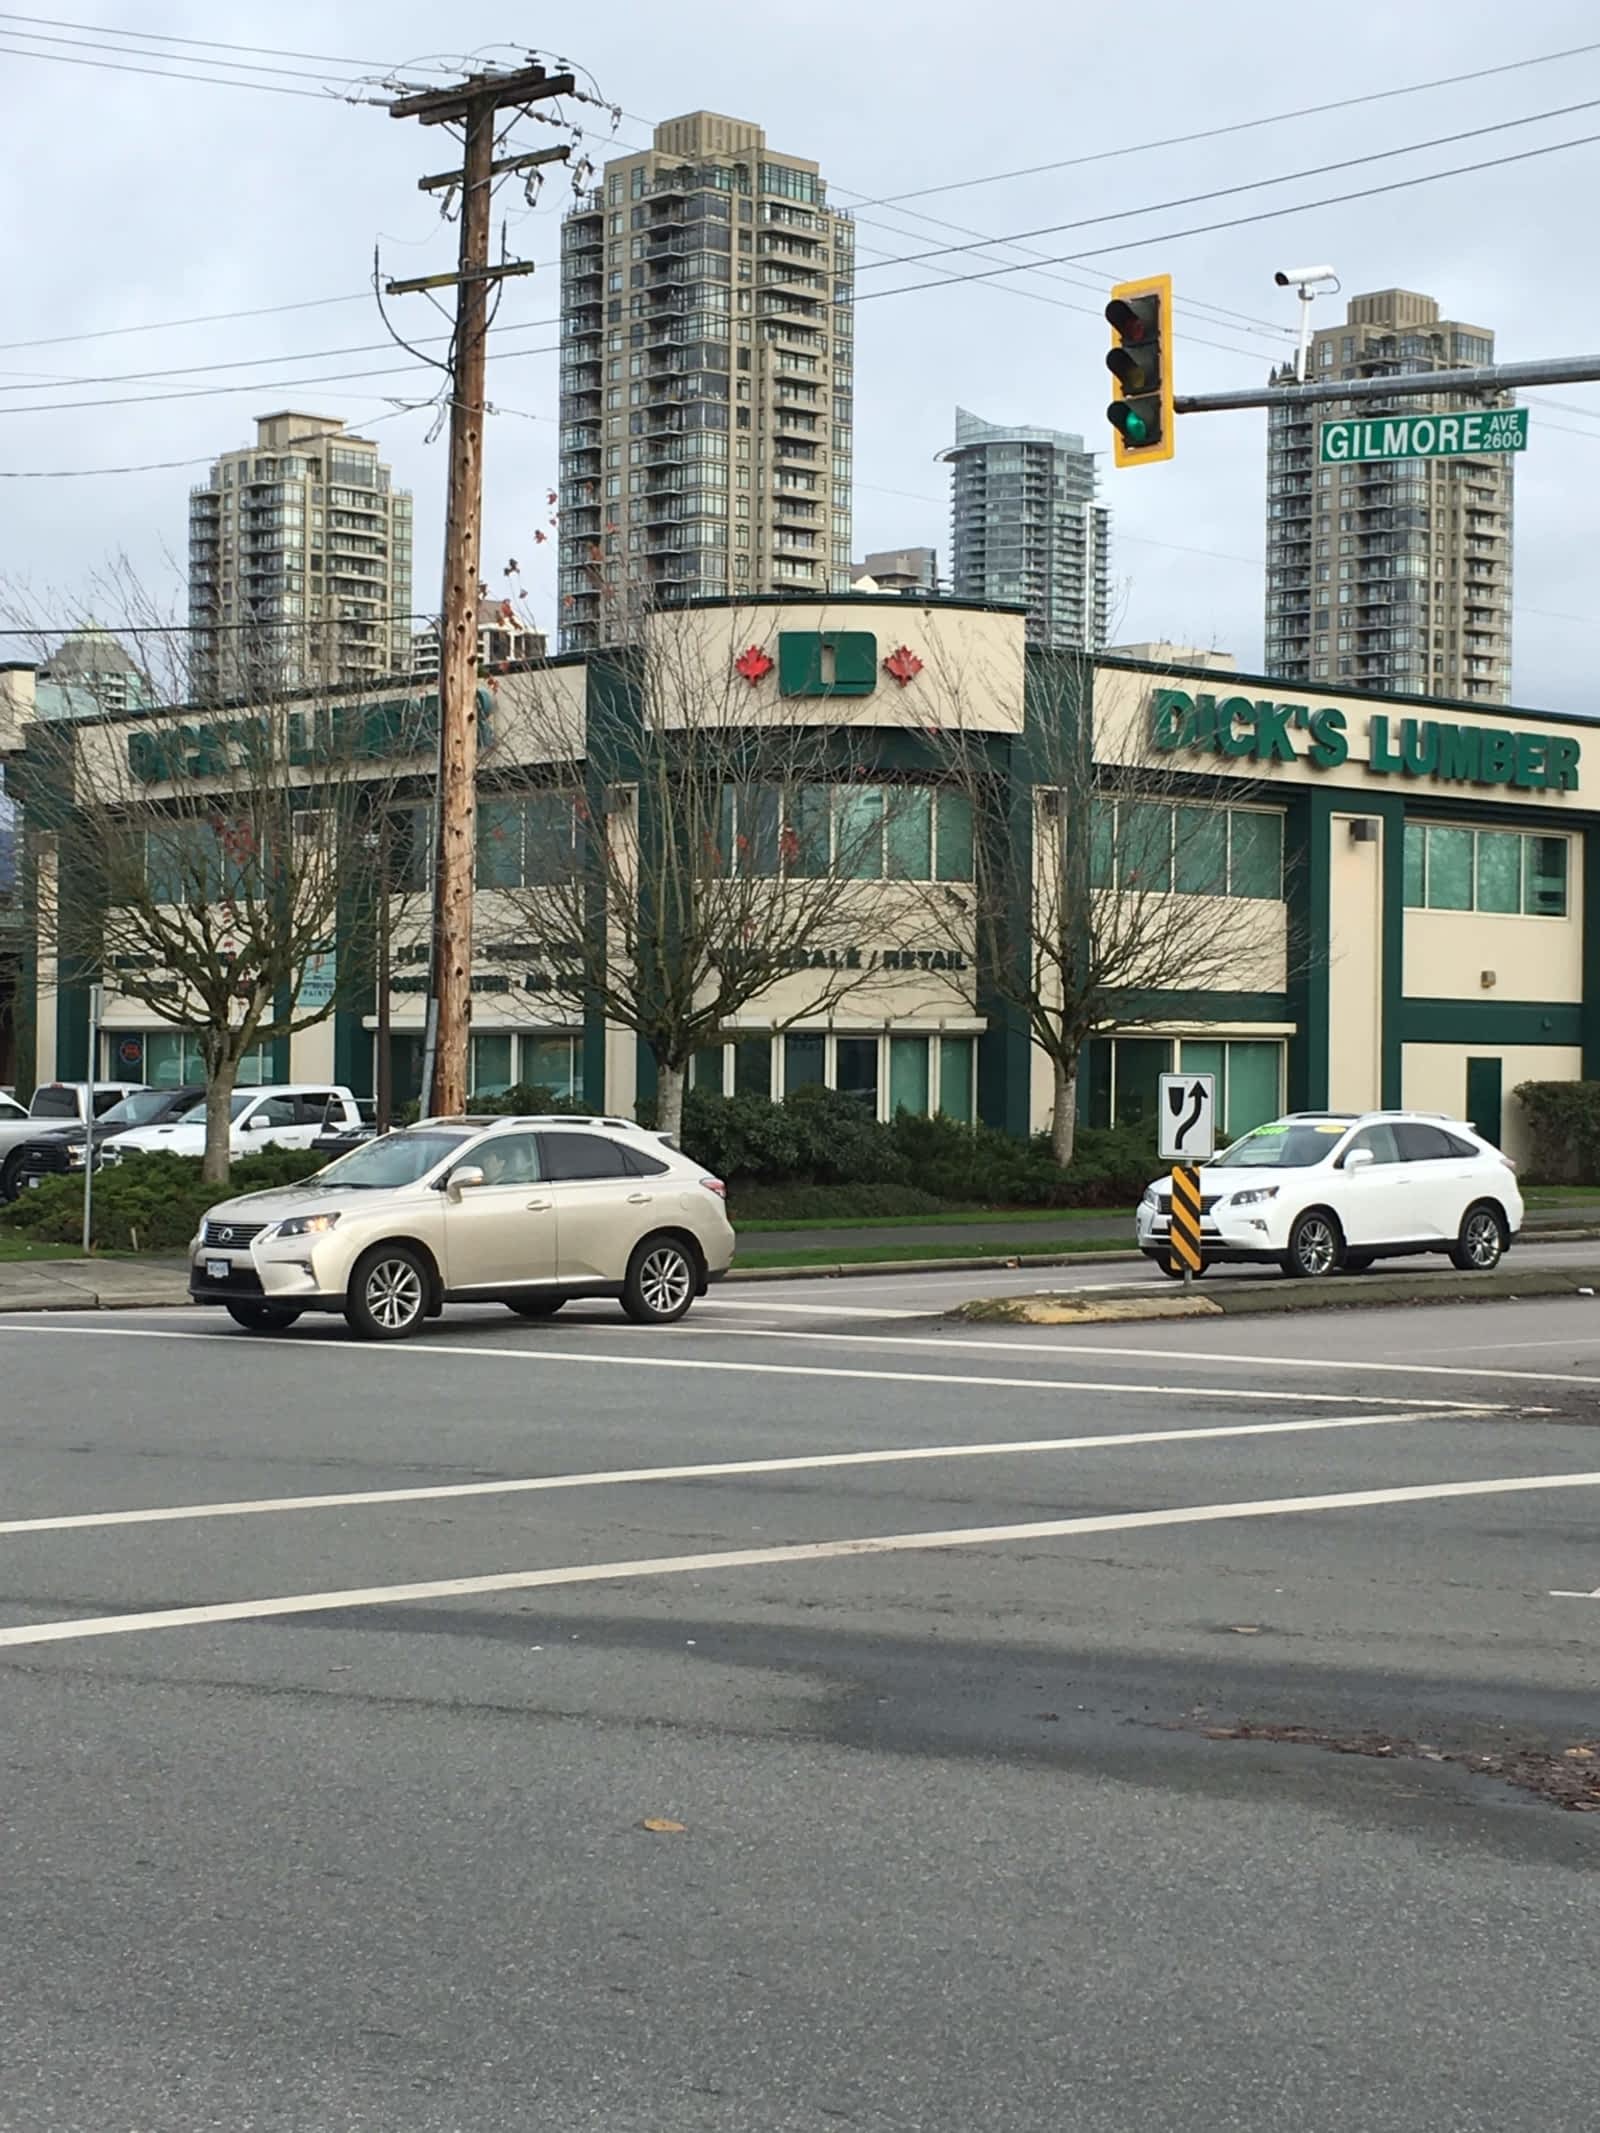 Dick S Lumber Building Supplies 2580 Gilmore Ave Burnaby Bc